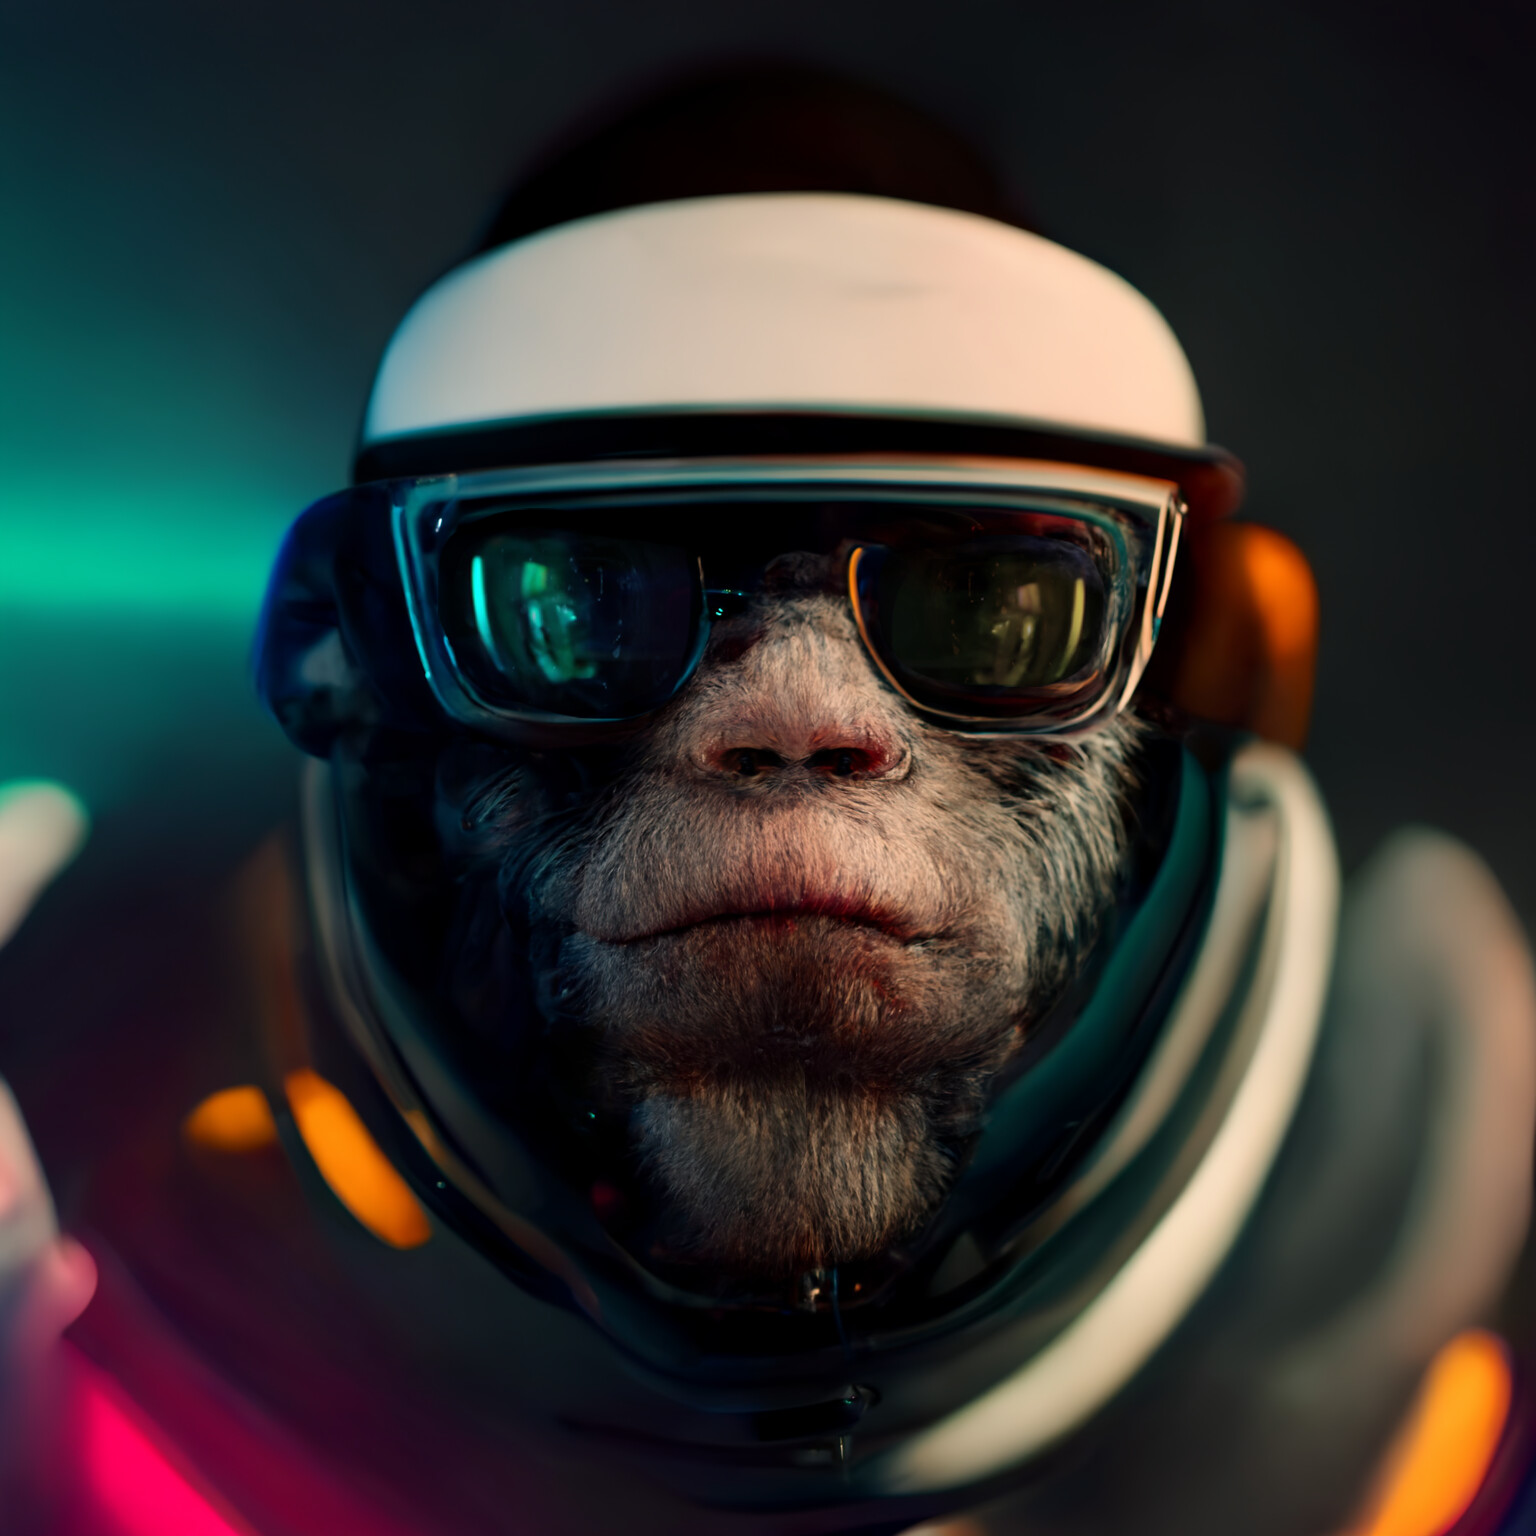 Space Monkey Wallpapers